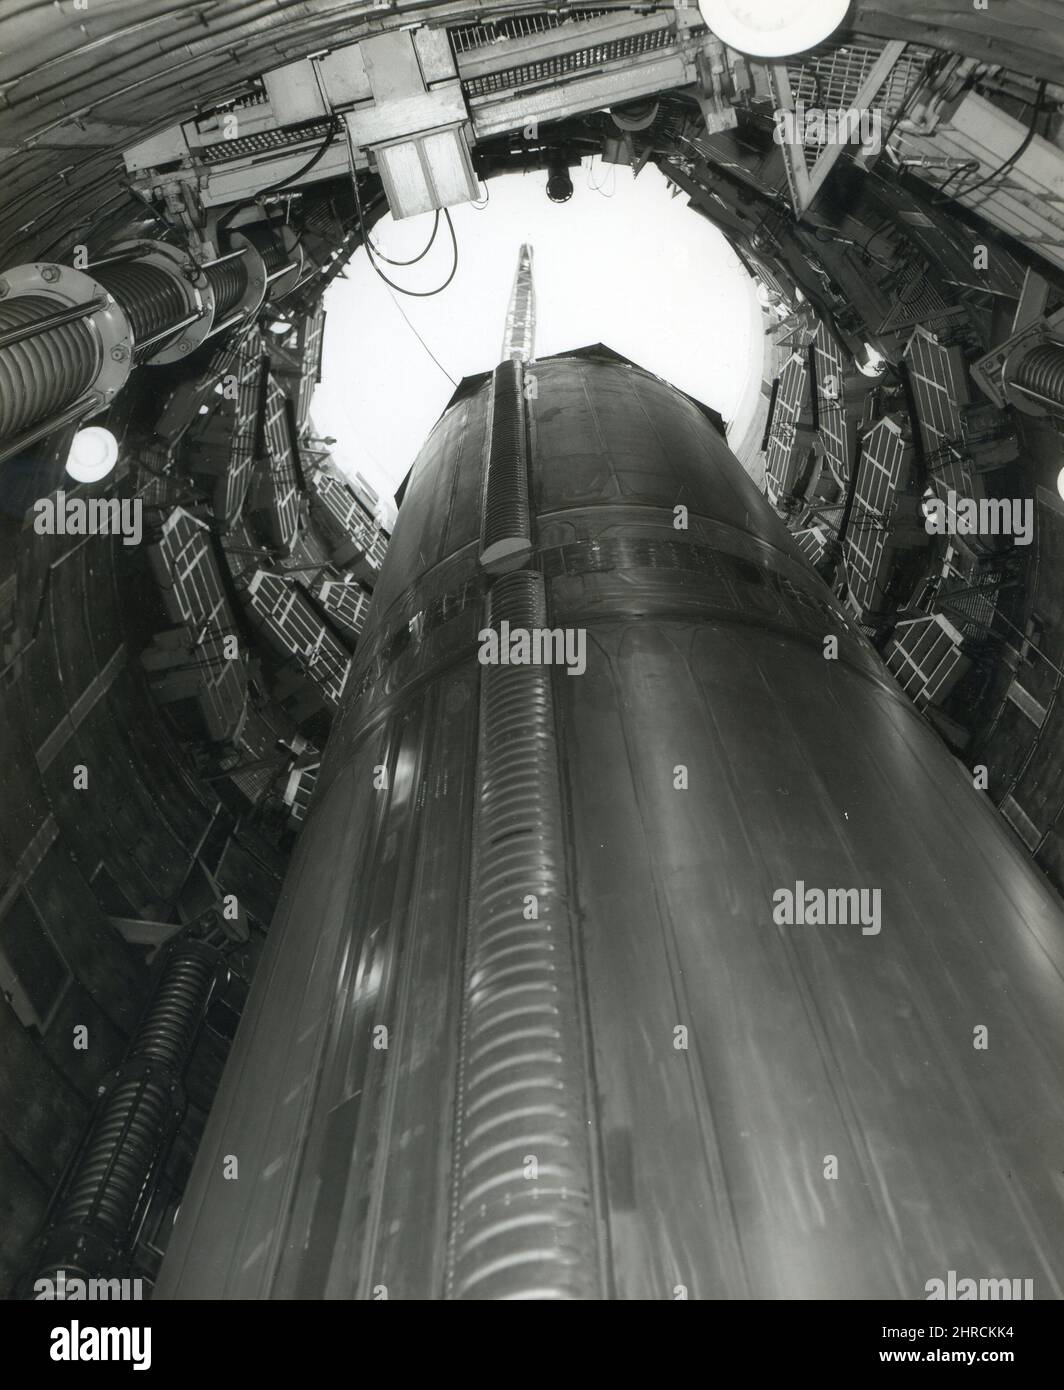 1963 - First stage of a Titan ICBM being lowered into its launch silo at McConnell, AFB, Kansas. Stock Photo